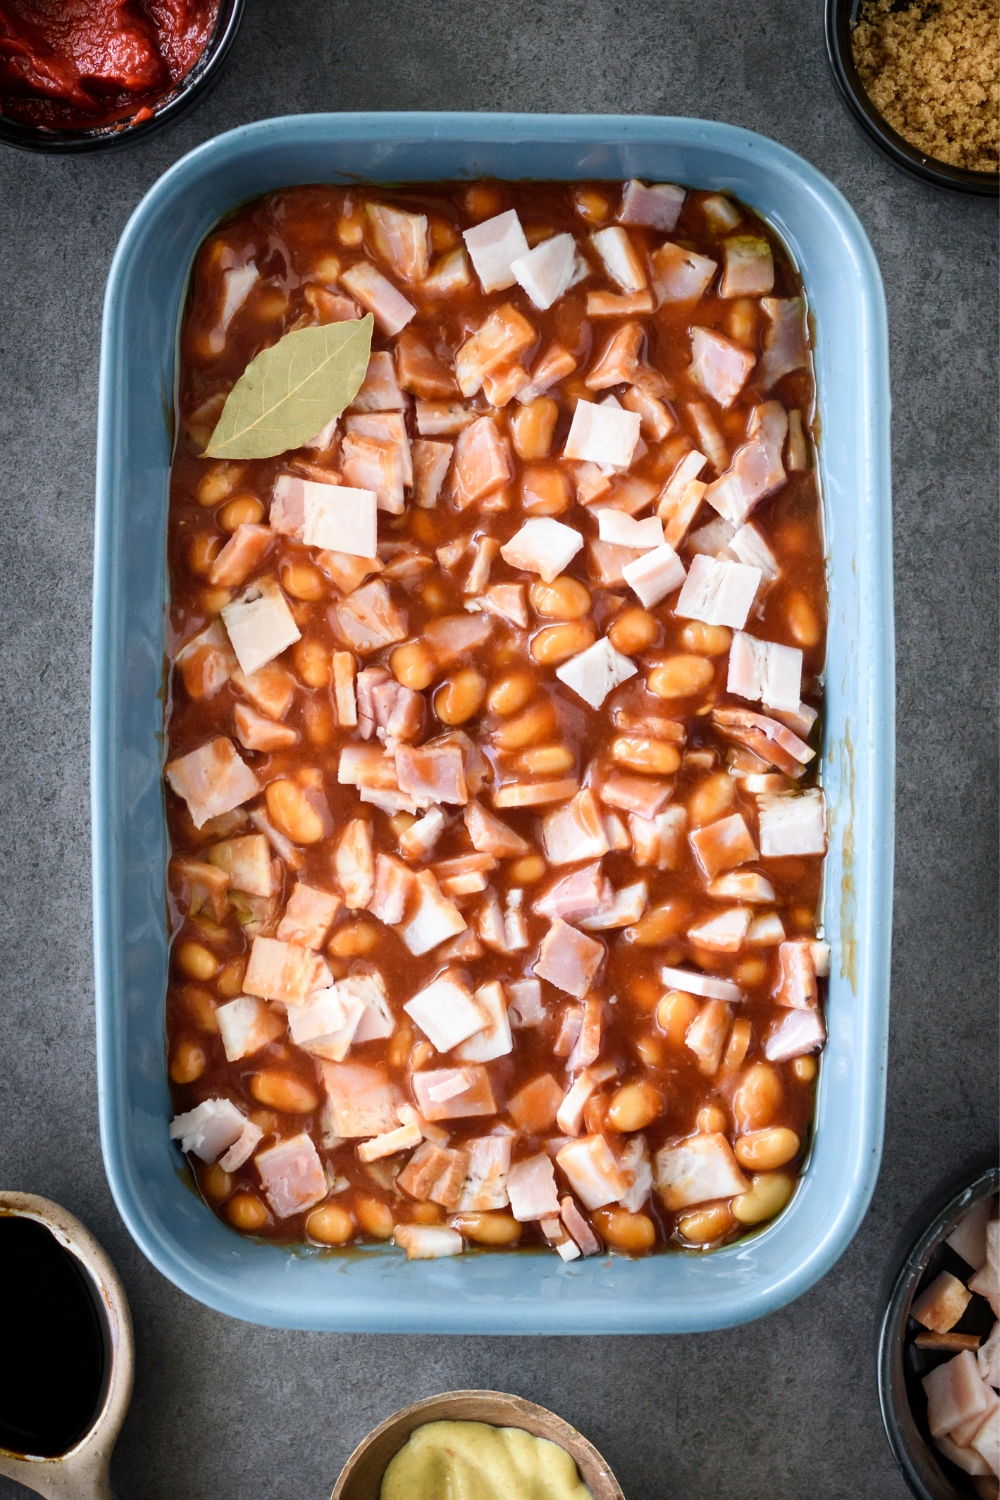 A blue casserole dish full of baked beans, bacon, and brown sugar mixture